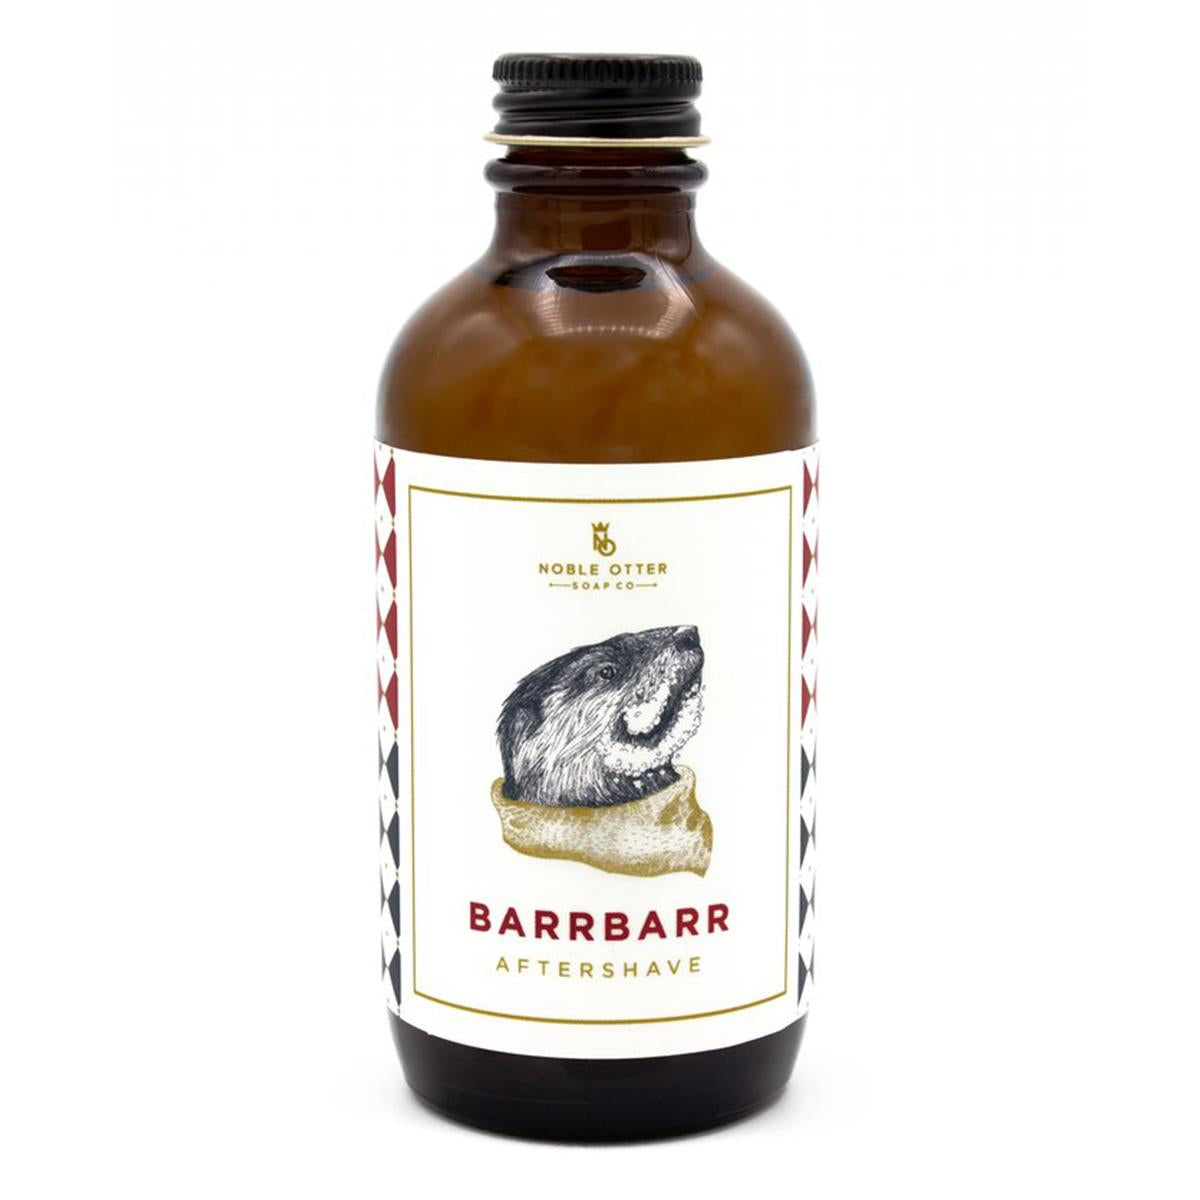 Primary image of Barrbarr Aftershave